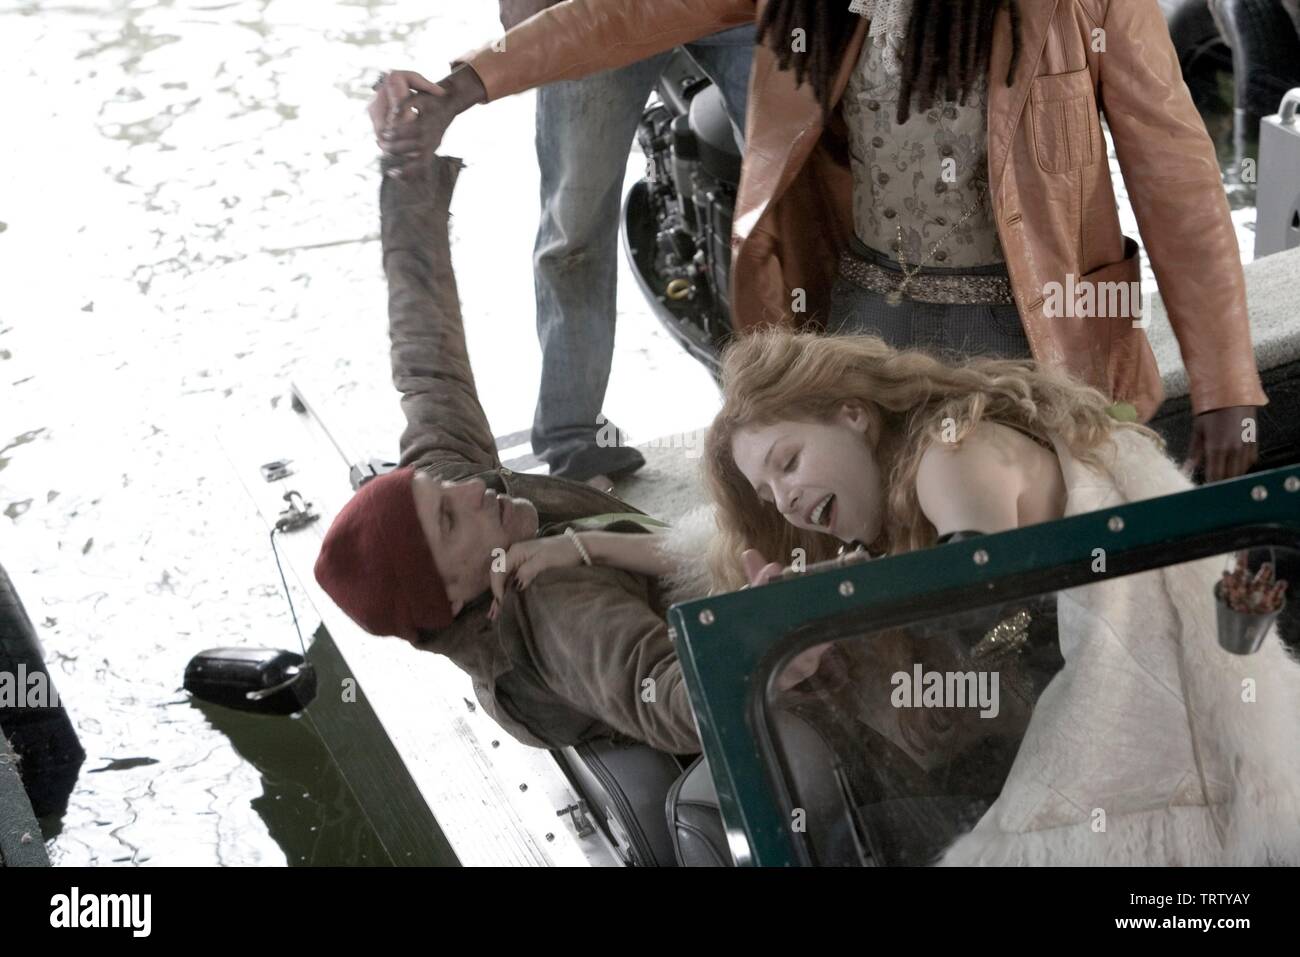 RACHELLE LEFEVRE and EDI GATHEGI in TWILIGHT (2008). Copyright: Editorial use only. No merchandising or book covers. This is a publicly distributed handout. Access rights only, no license of copyright provided. Only to be reproduced in conjunction with promotion of this film. Credit: IMPRINT ENTERTAINMENT/MAVERICK FILMS/SUMMIT ENTERTAINMENT/ / Album Stock Photo